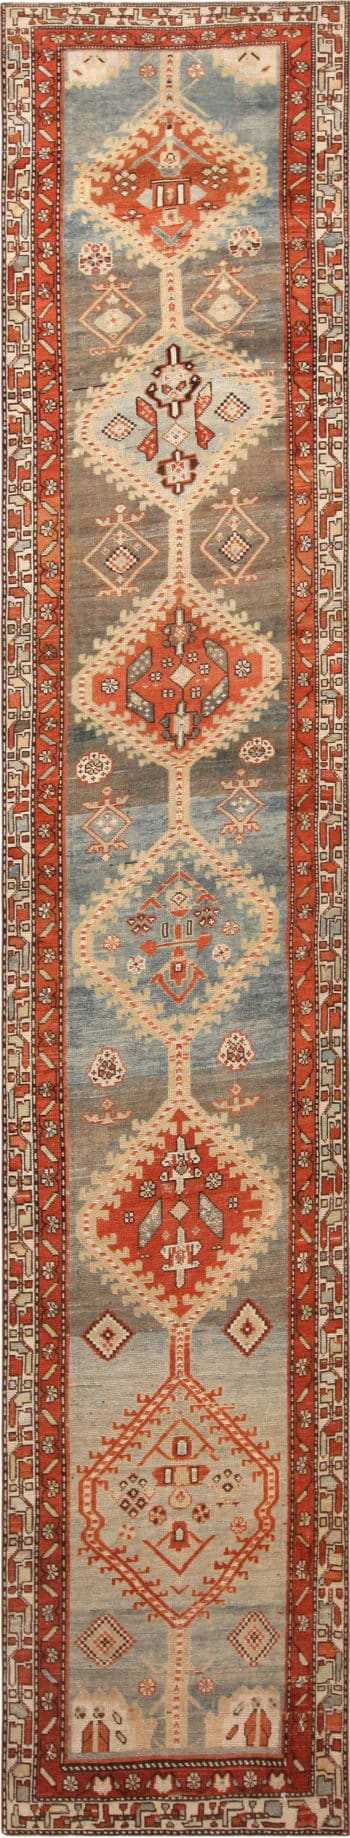 Antique Persian Malayer Runner Rug 72153 by Nazmiyal Antique Rugs